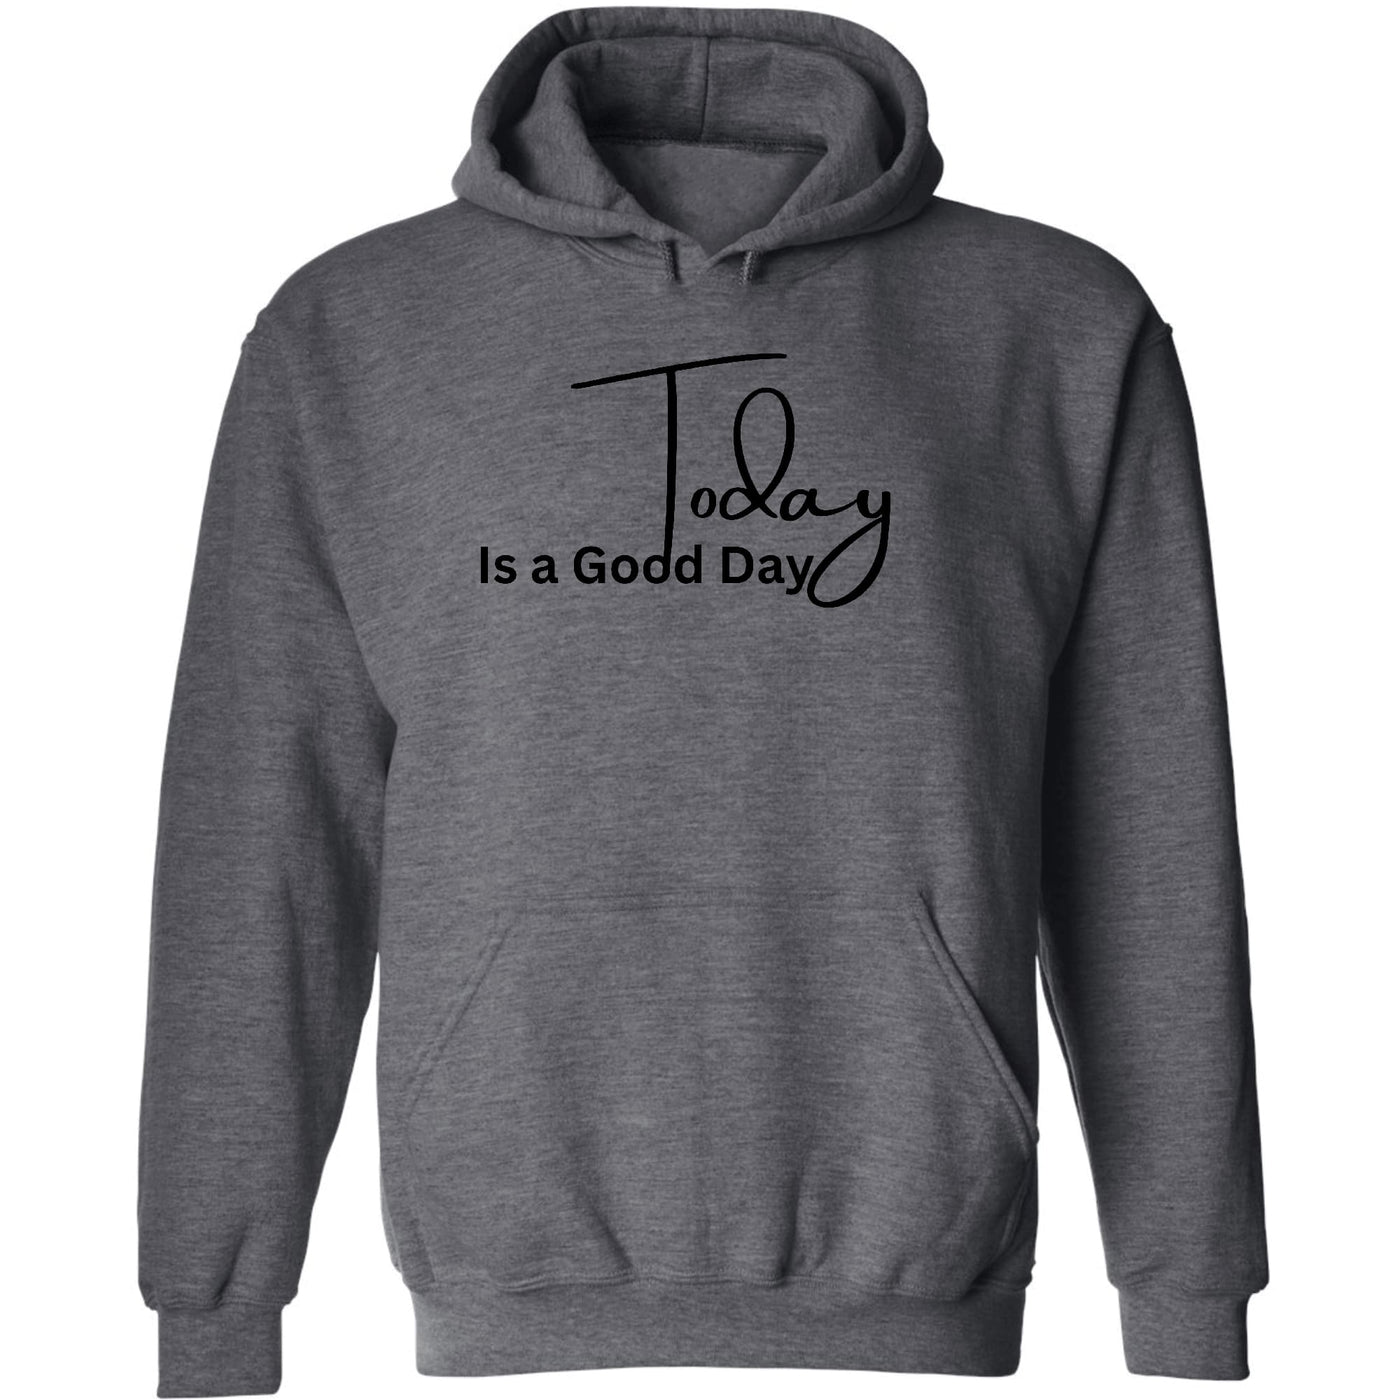 Mens Graphic Hoodie Today Is a Good Day - Unisex | Hoodies